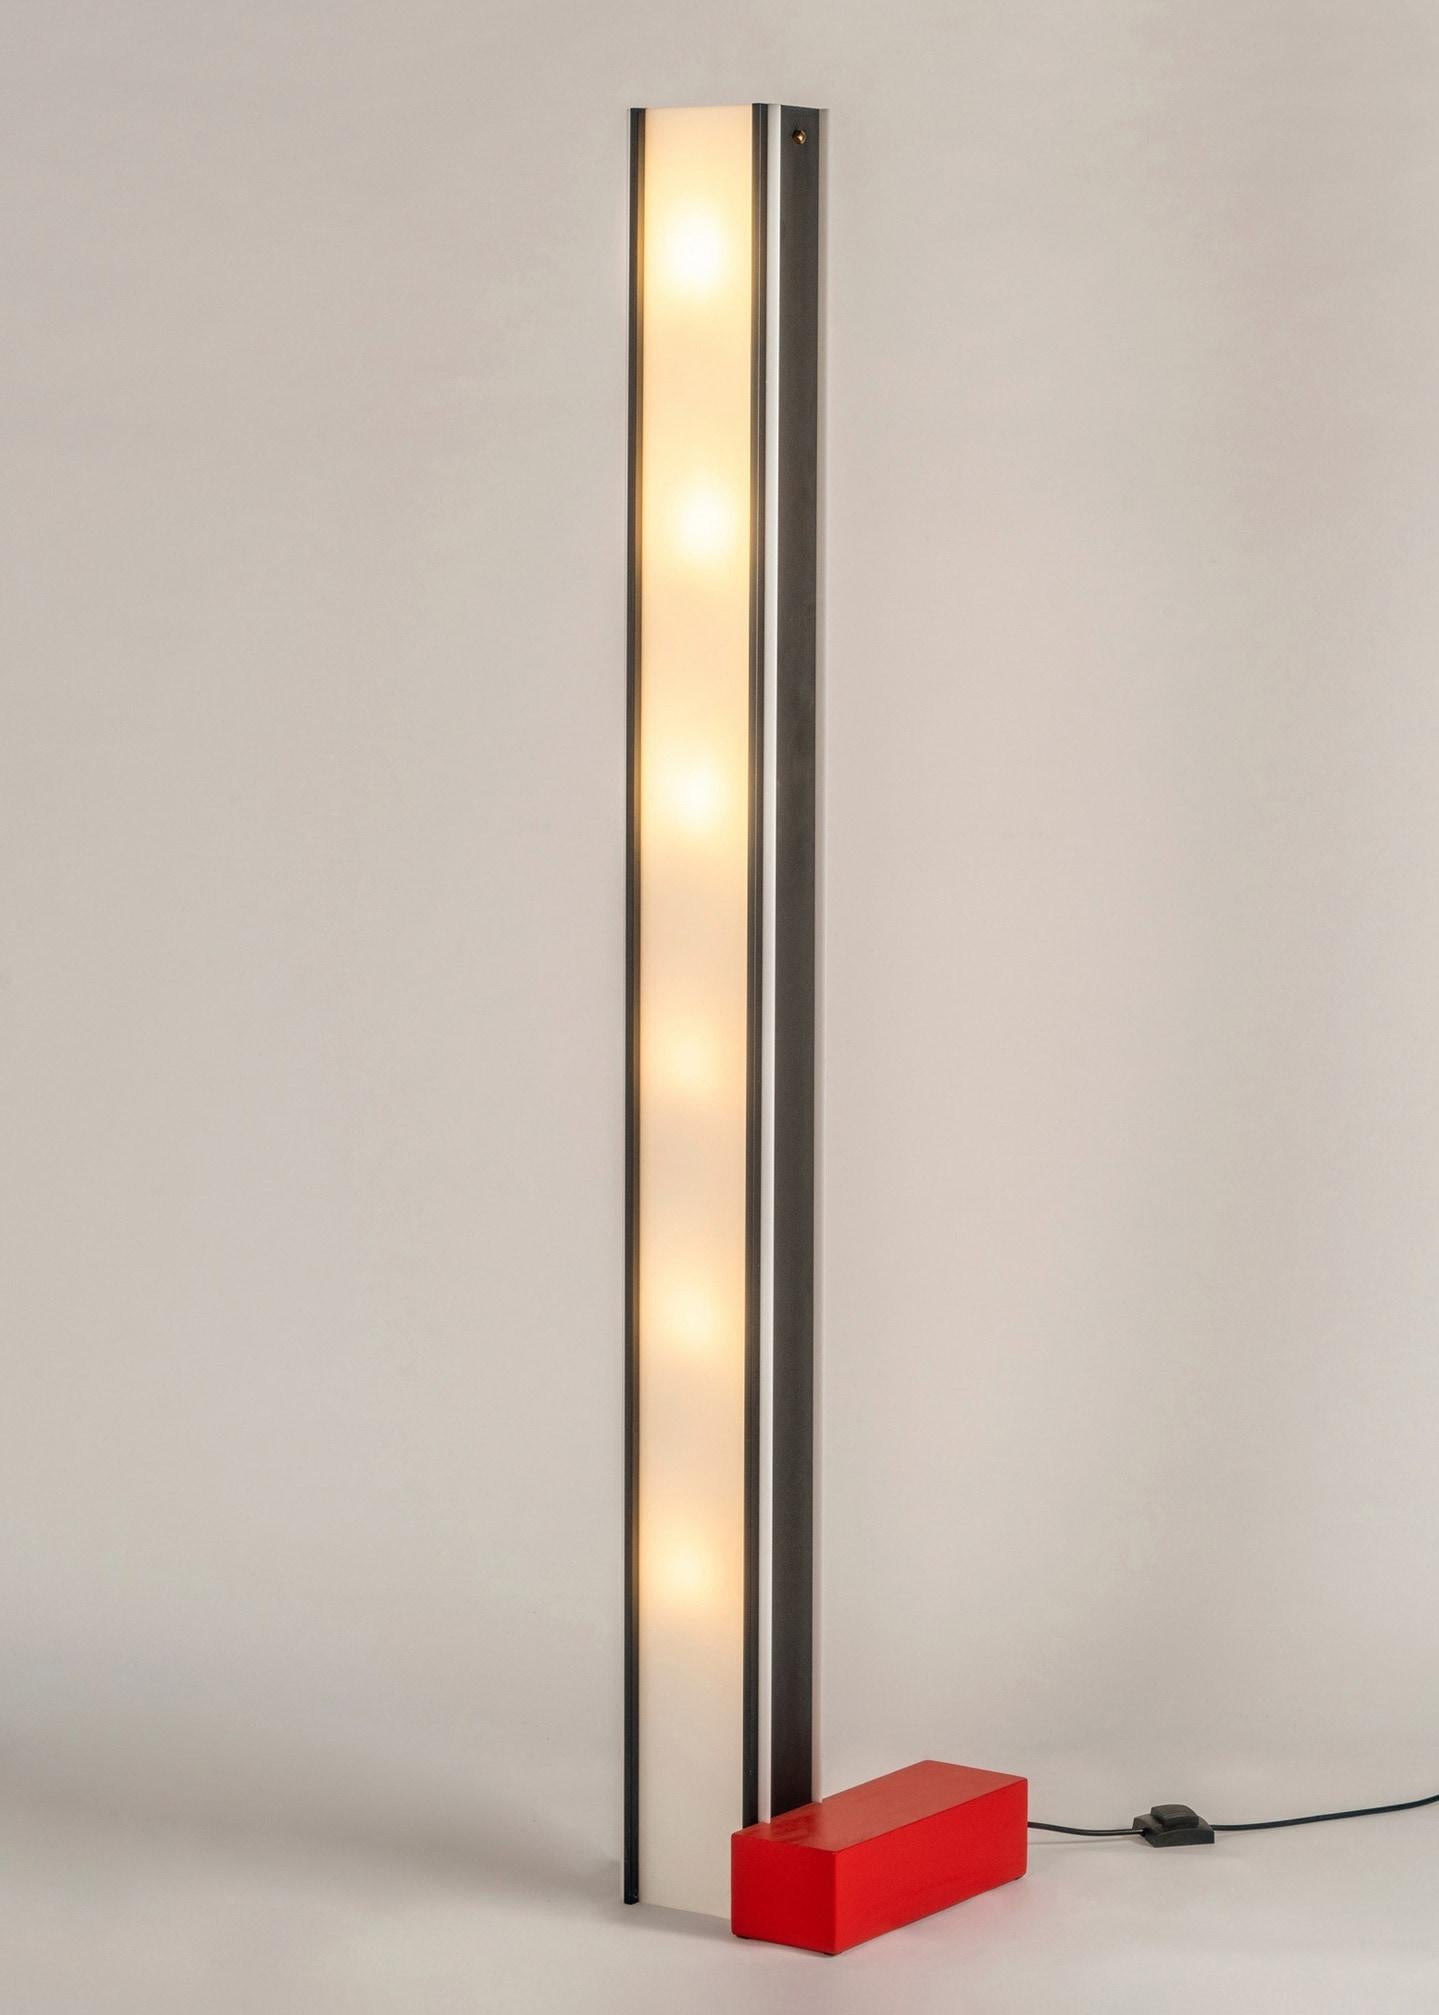 Floor lamp in black painted metal and plexiglass. The red metal base recalls the brand's iconic colors.